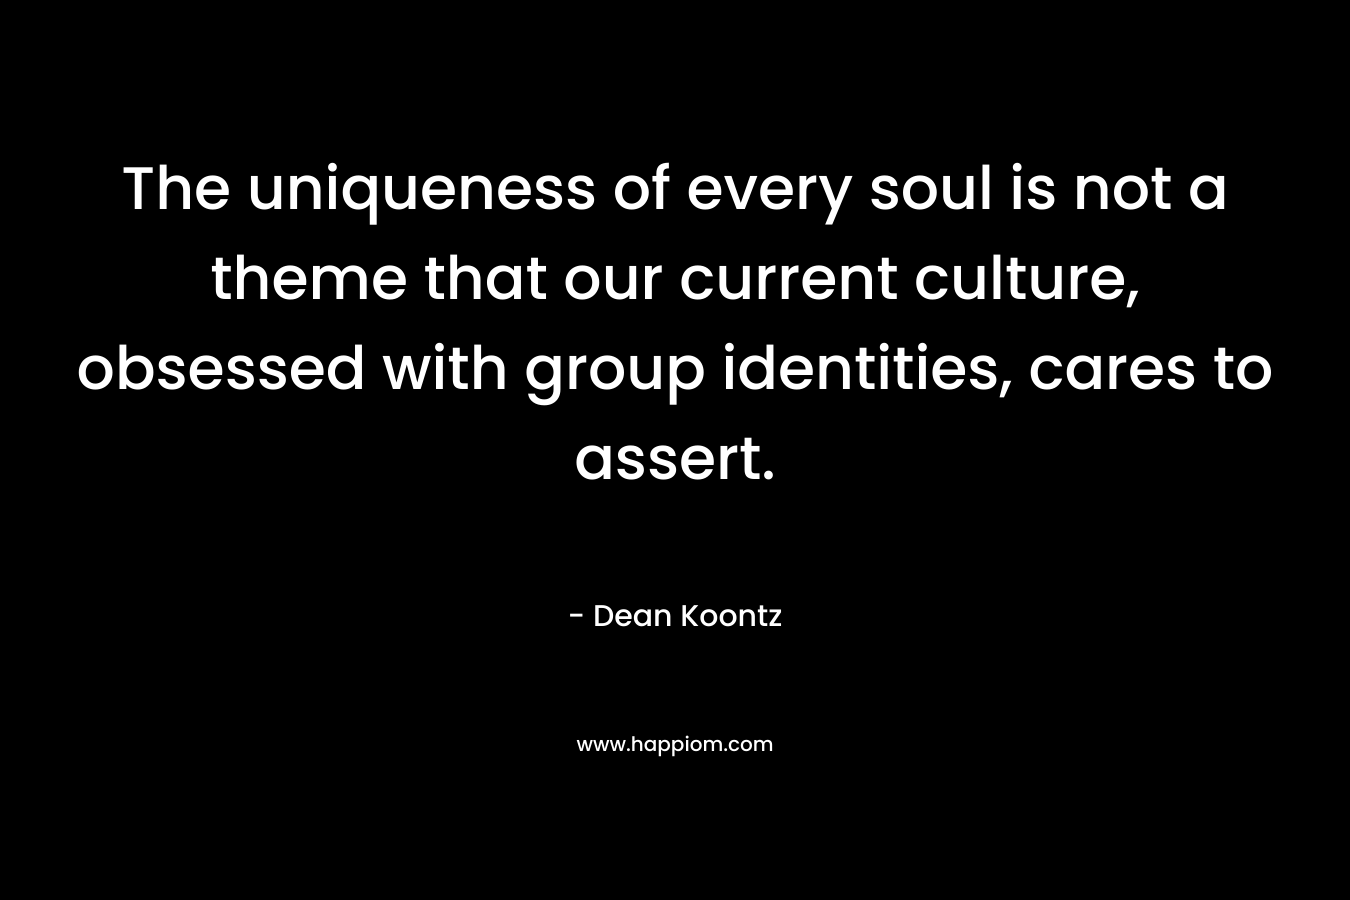 The uniqueness of every soul is not a theme that our current culture, obsessed with group identities, cares to assert. – Dean Koontz